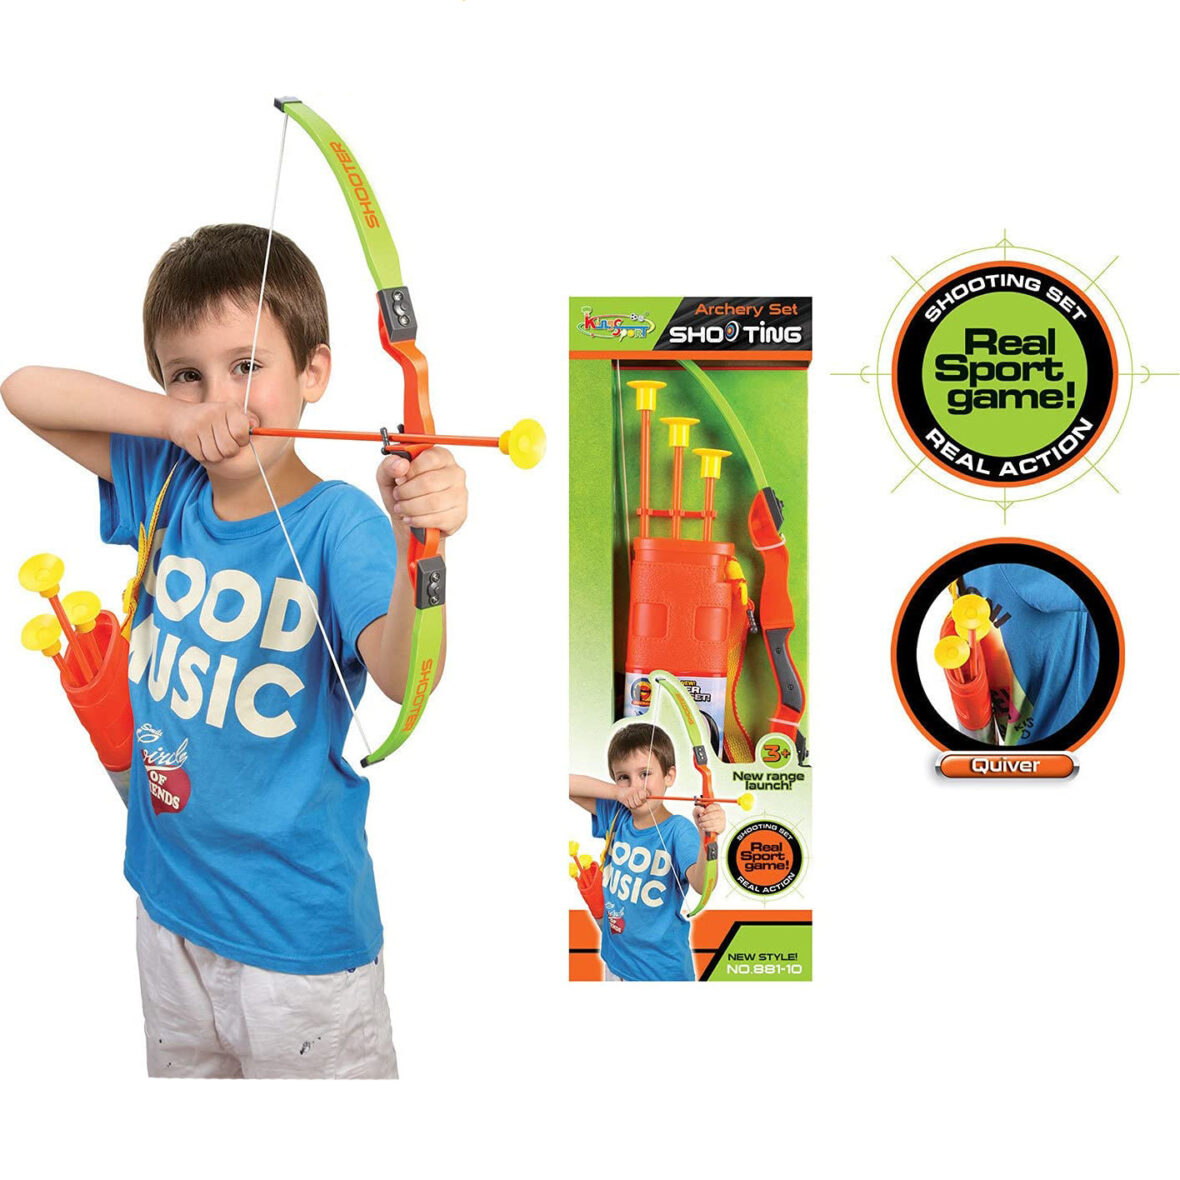 U Smile Bow and Arrow Archery Toy Set for Kids with Quiver – 24 Inch Sports Archery Shooting Toy Kids Boys Girls, Multicolor)